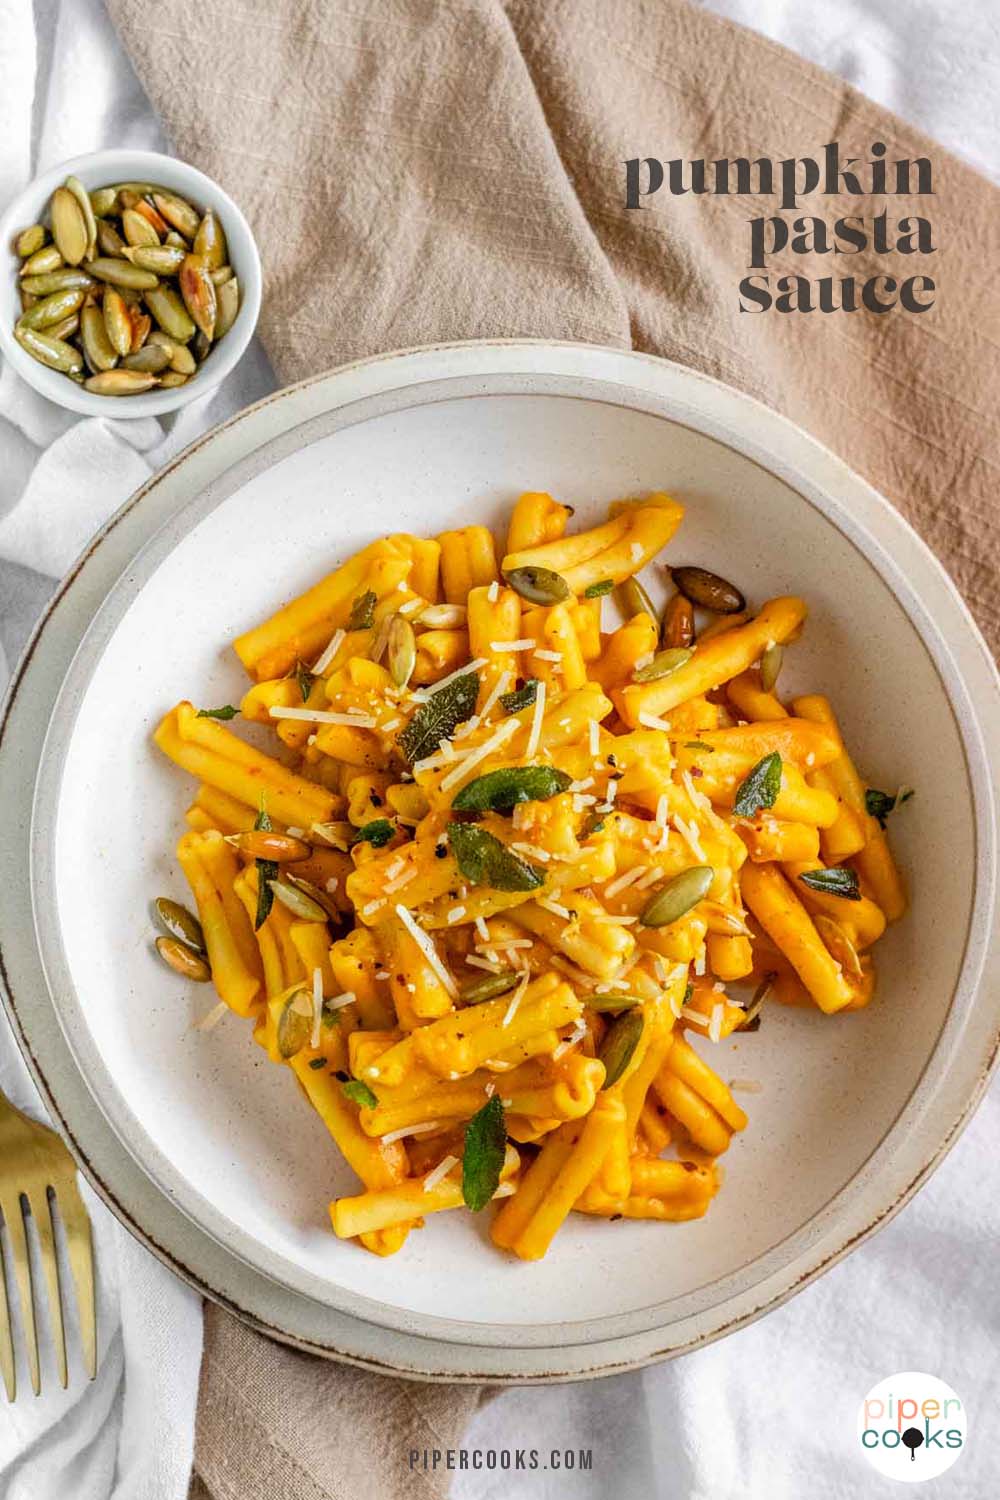 Pasta in a bowl coated in an orange sauce and garnished with sage, cheese, and pumpkin seeds with text for Pinterest.